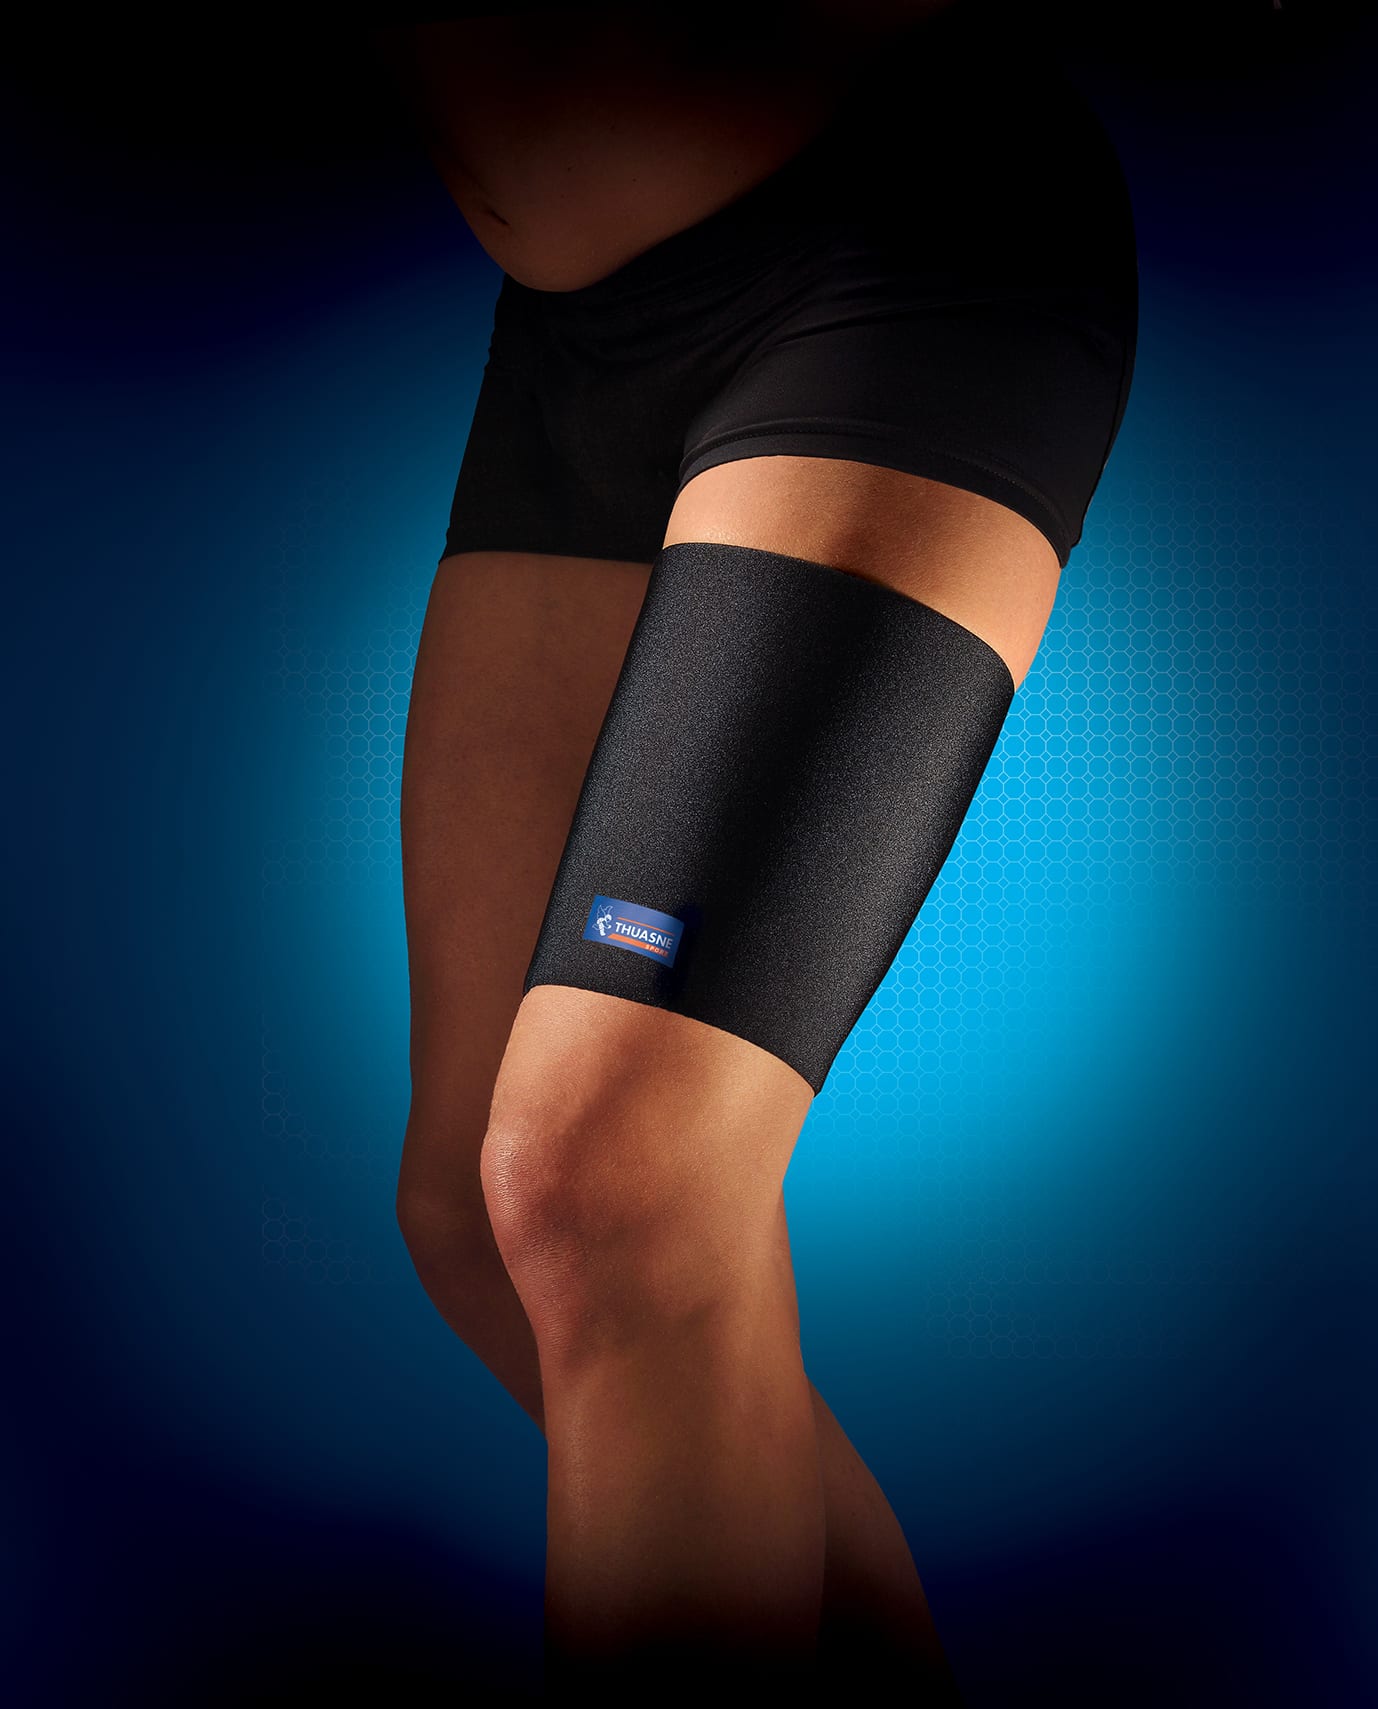 A person wearing a Thuasne Neoprene thigh support